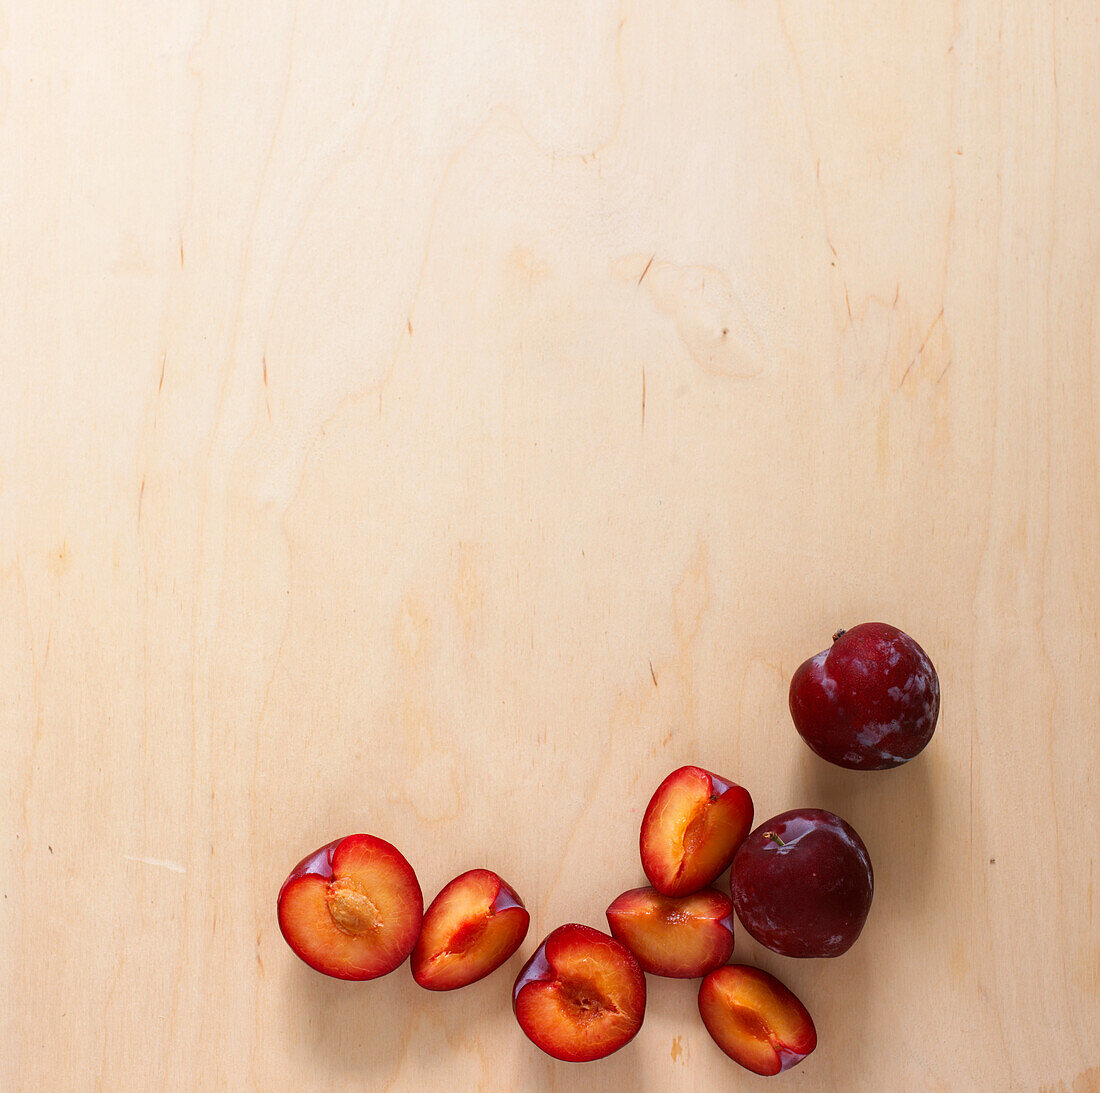 Whole, cored and sliced plums on wooden surface